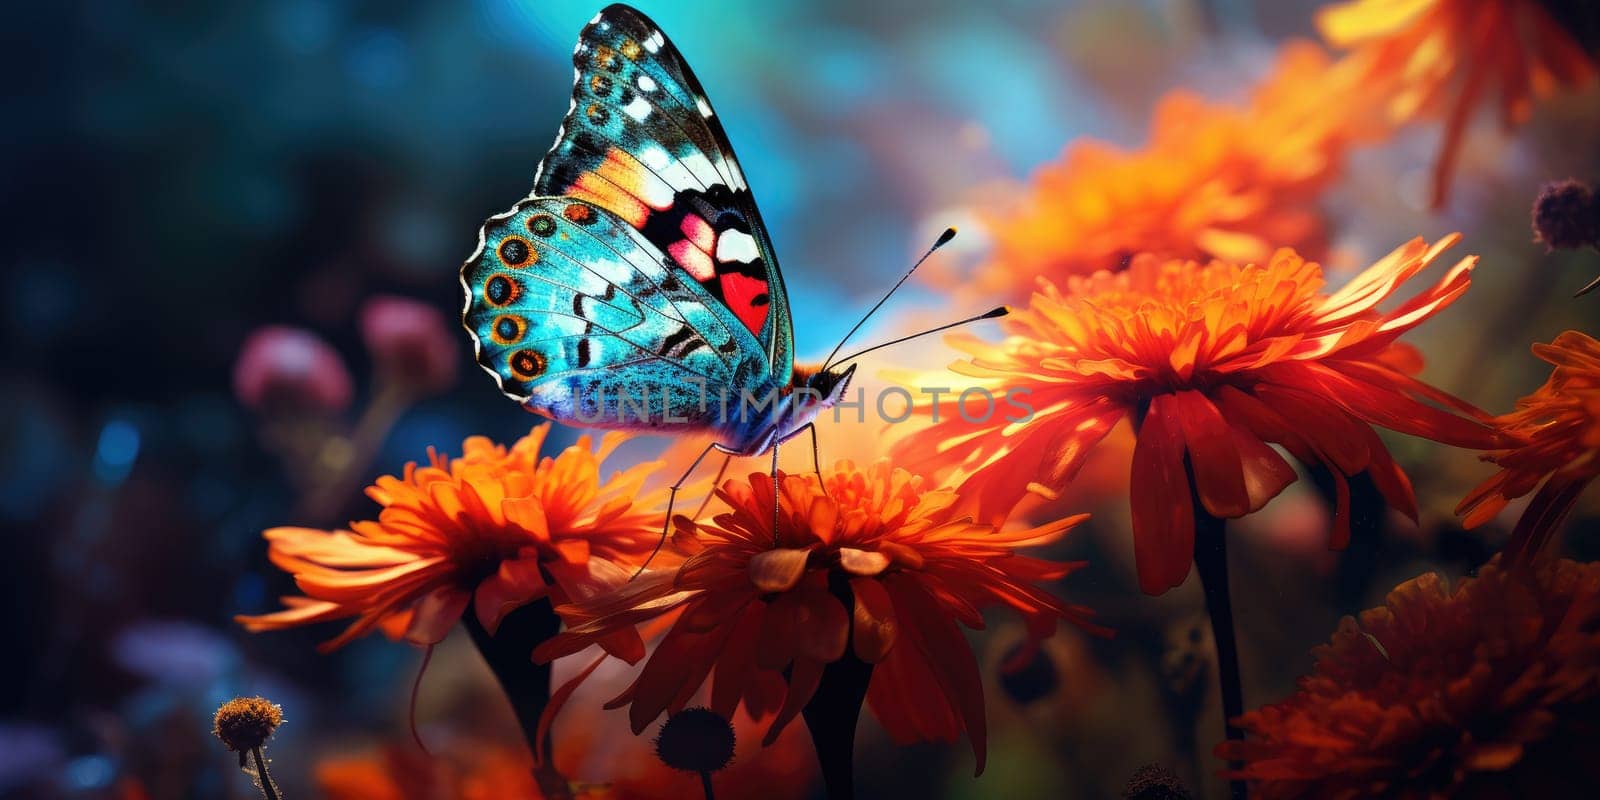 A colorful butterfly on the flower by Kadula